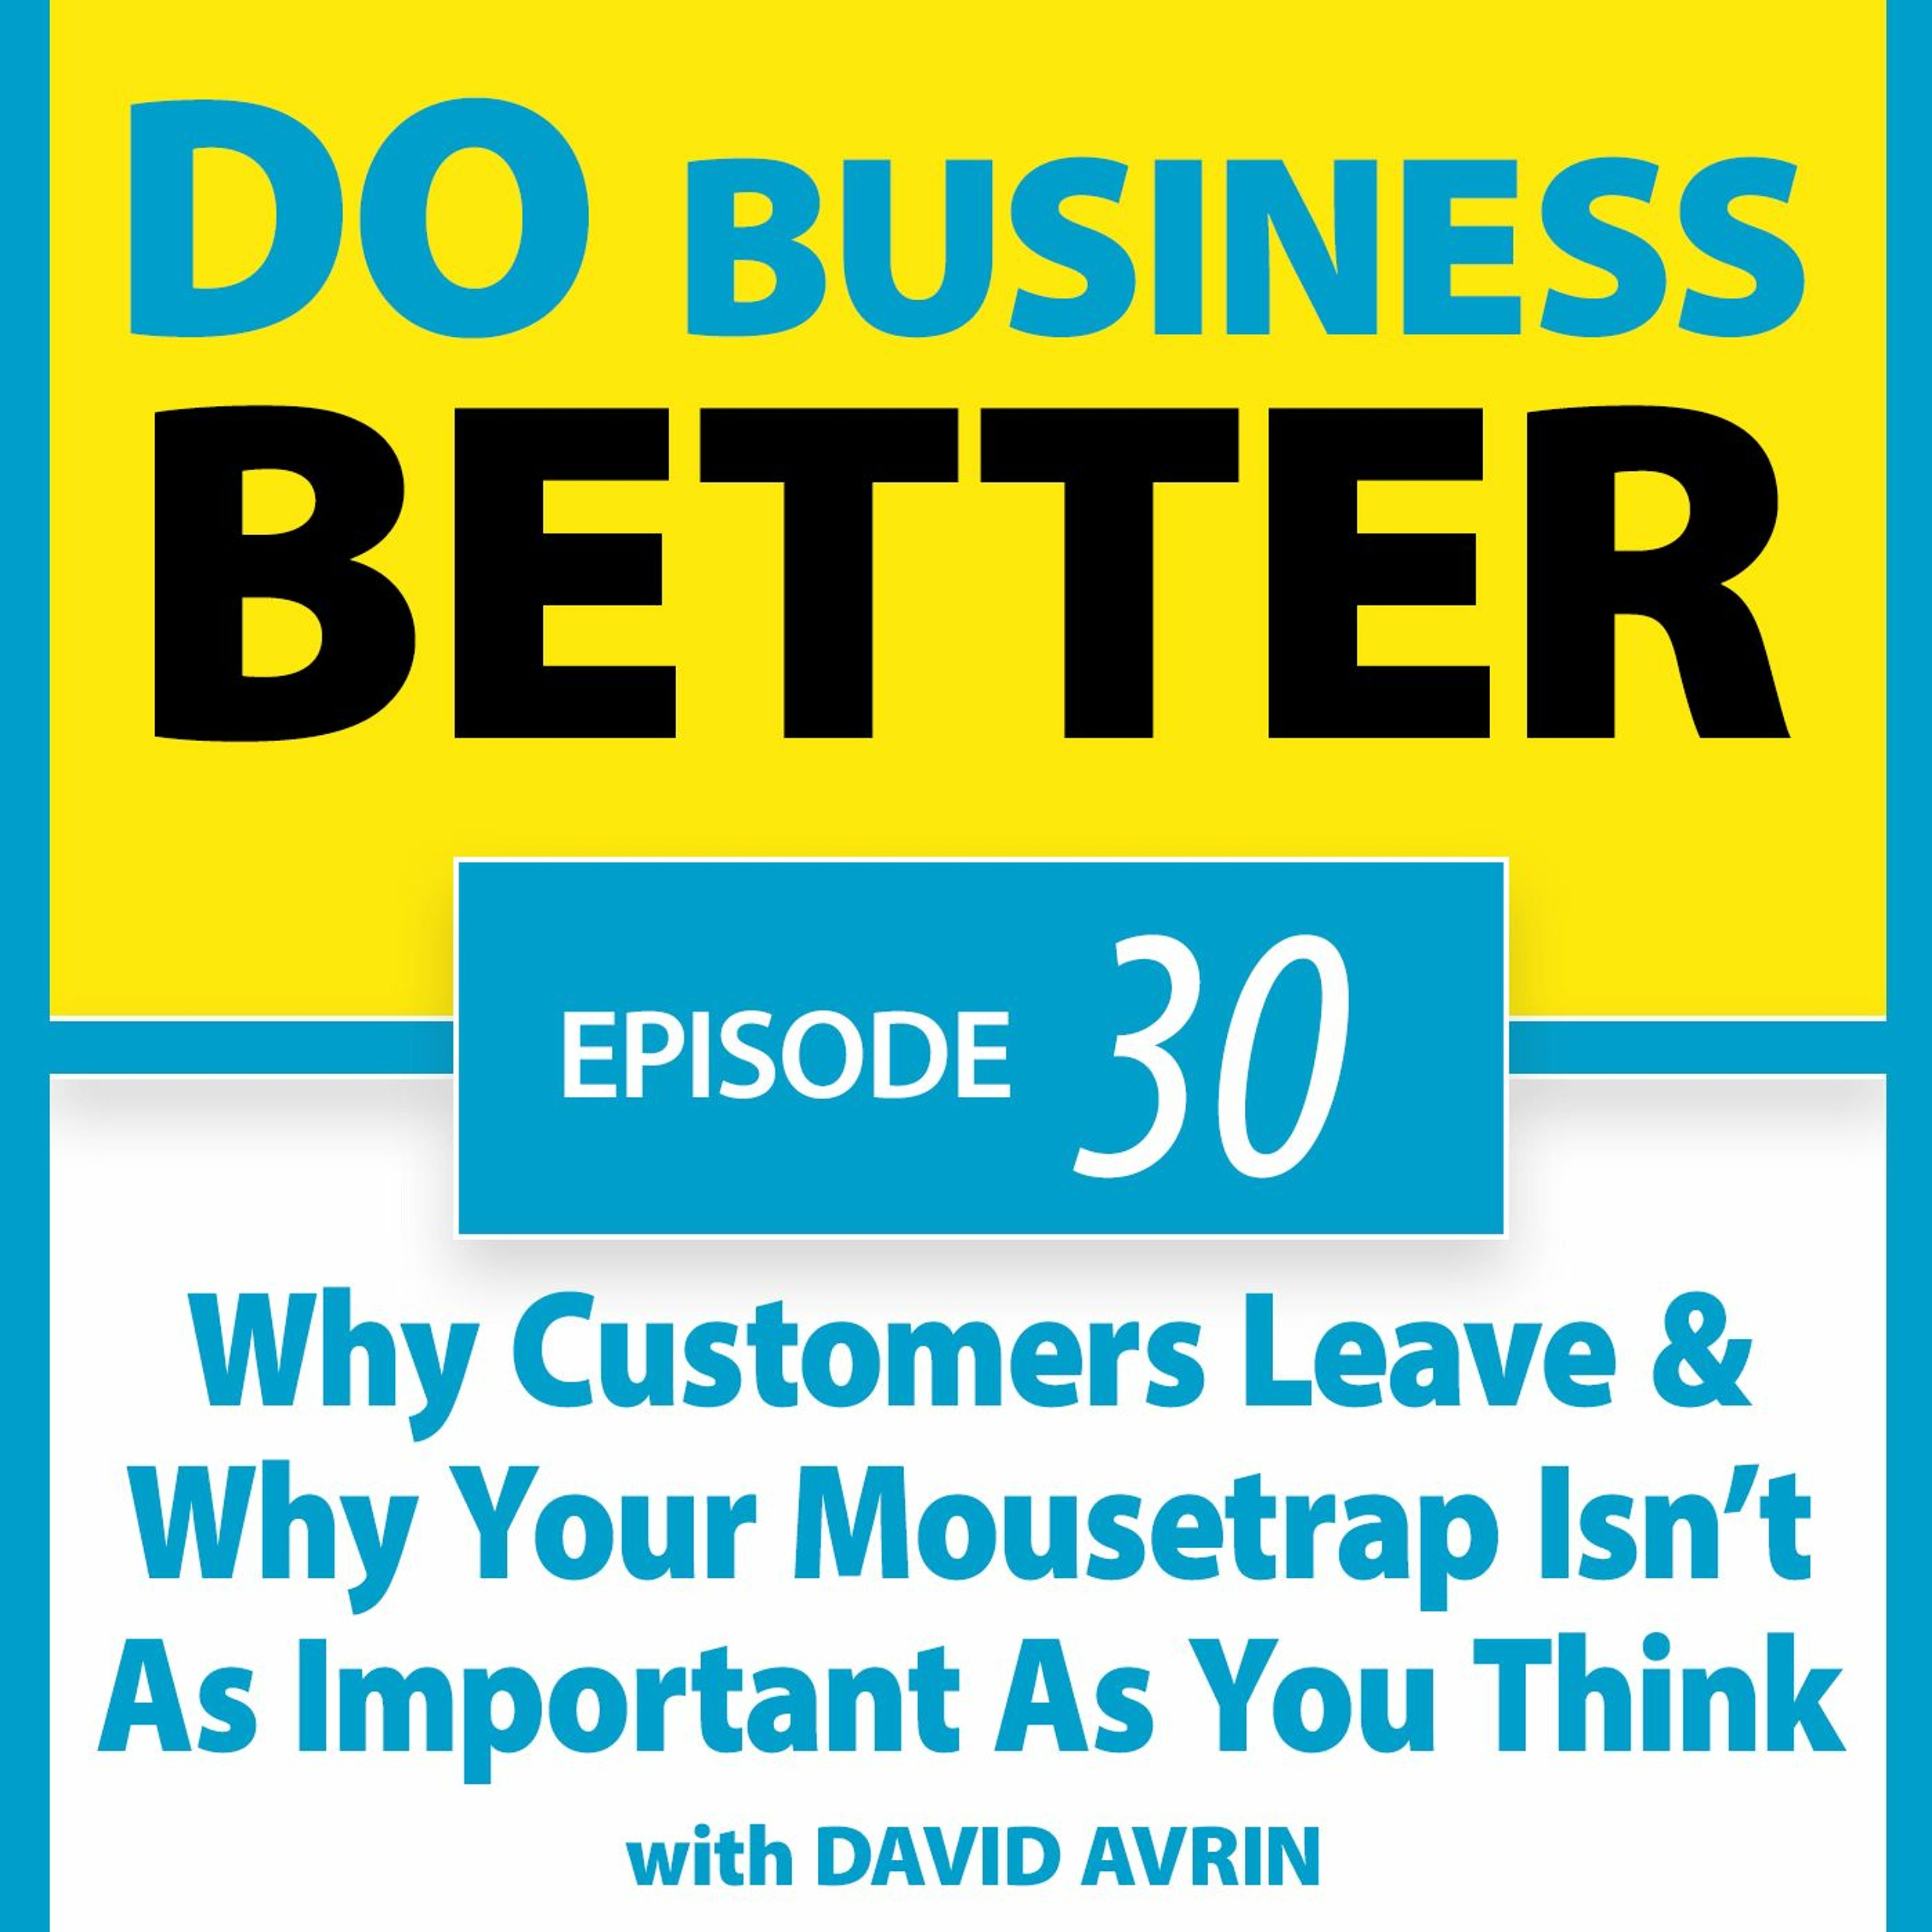 30 - Why Customers Leave & Why Your Mousetrap Isn’t As Important As You Think with David Avrin